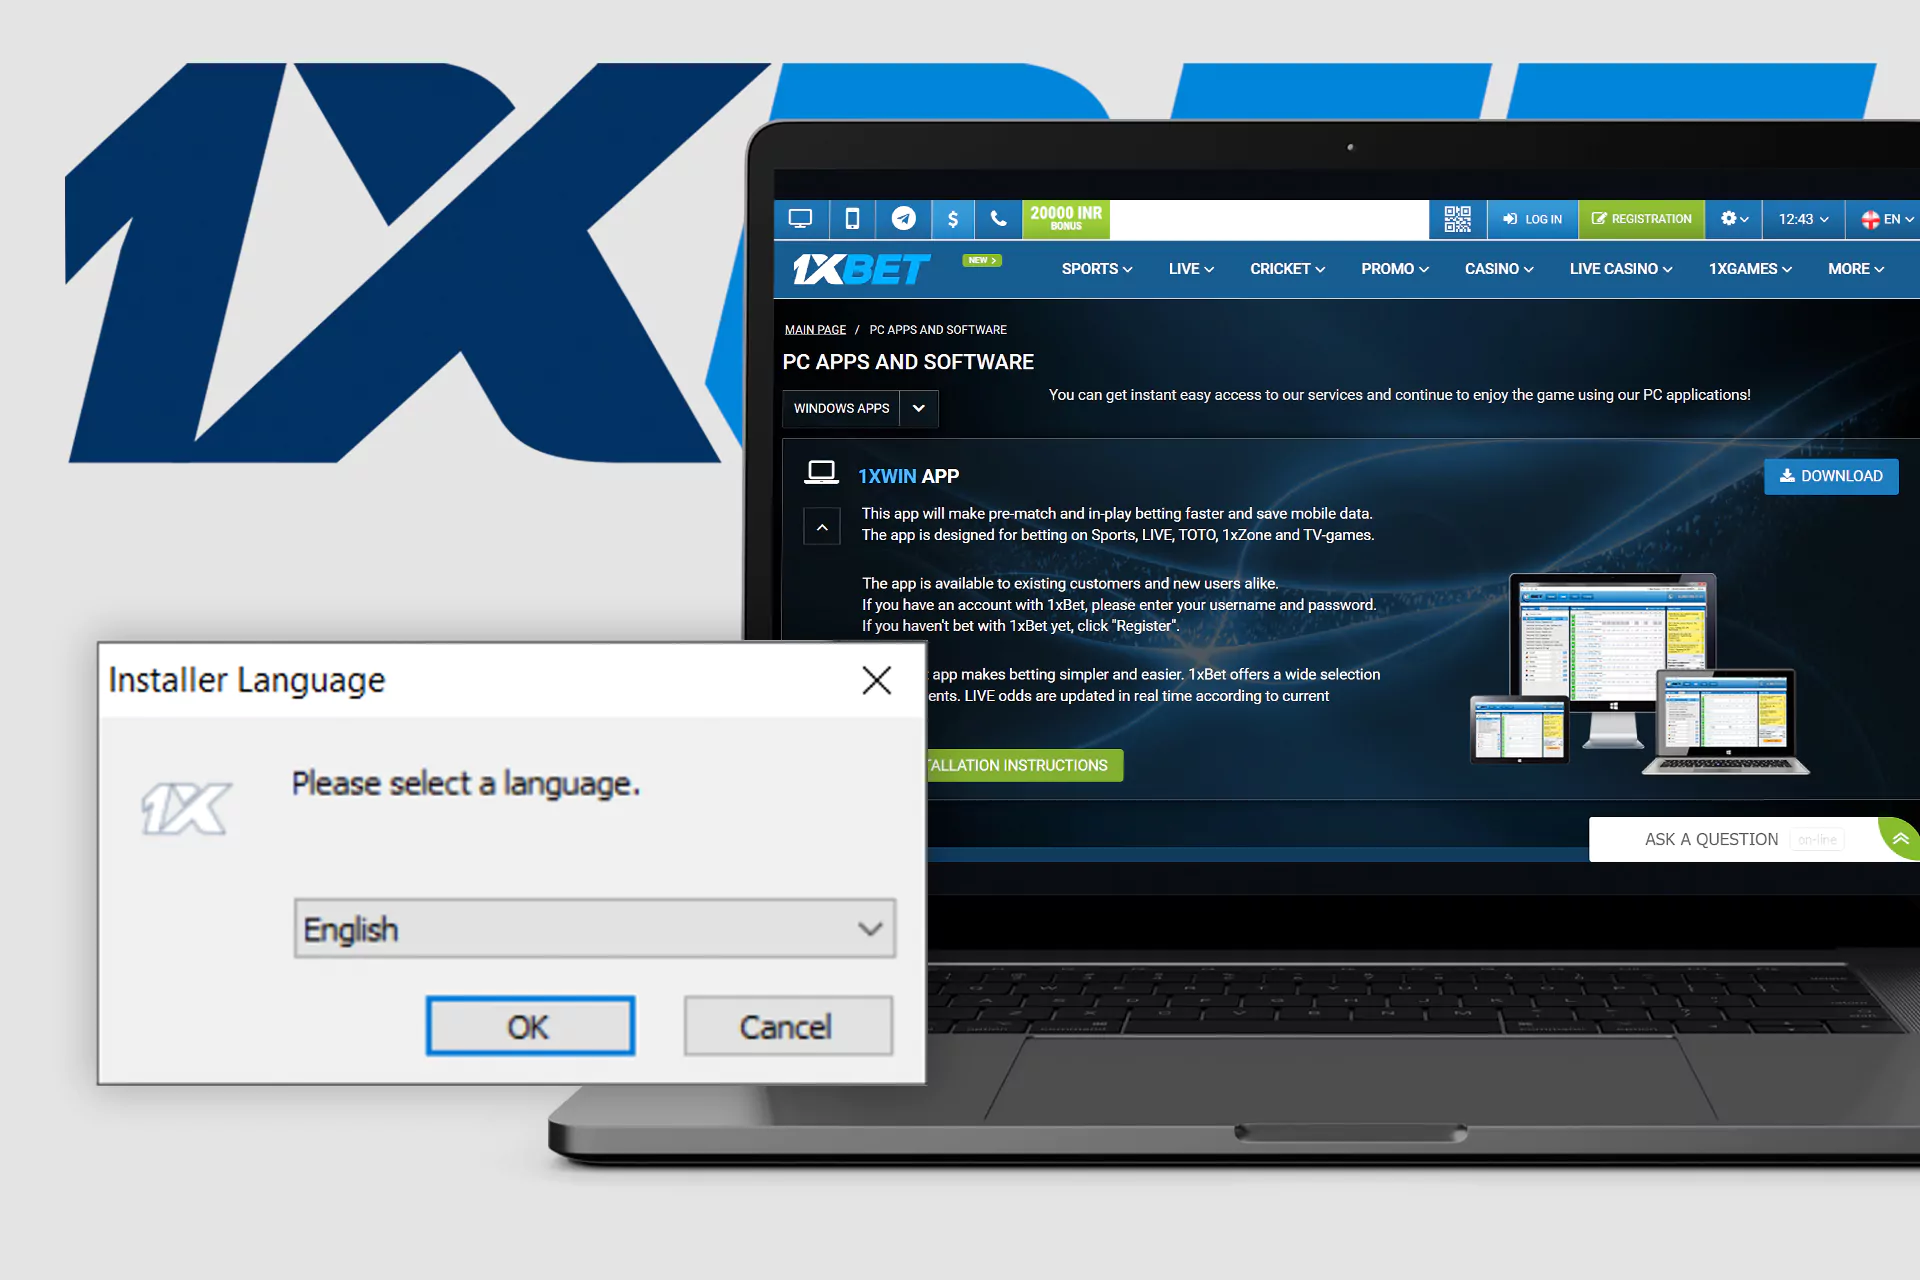 1xBet is available for Windows and MacOS.